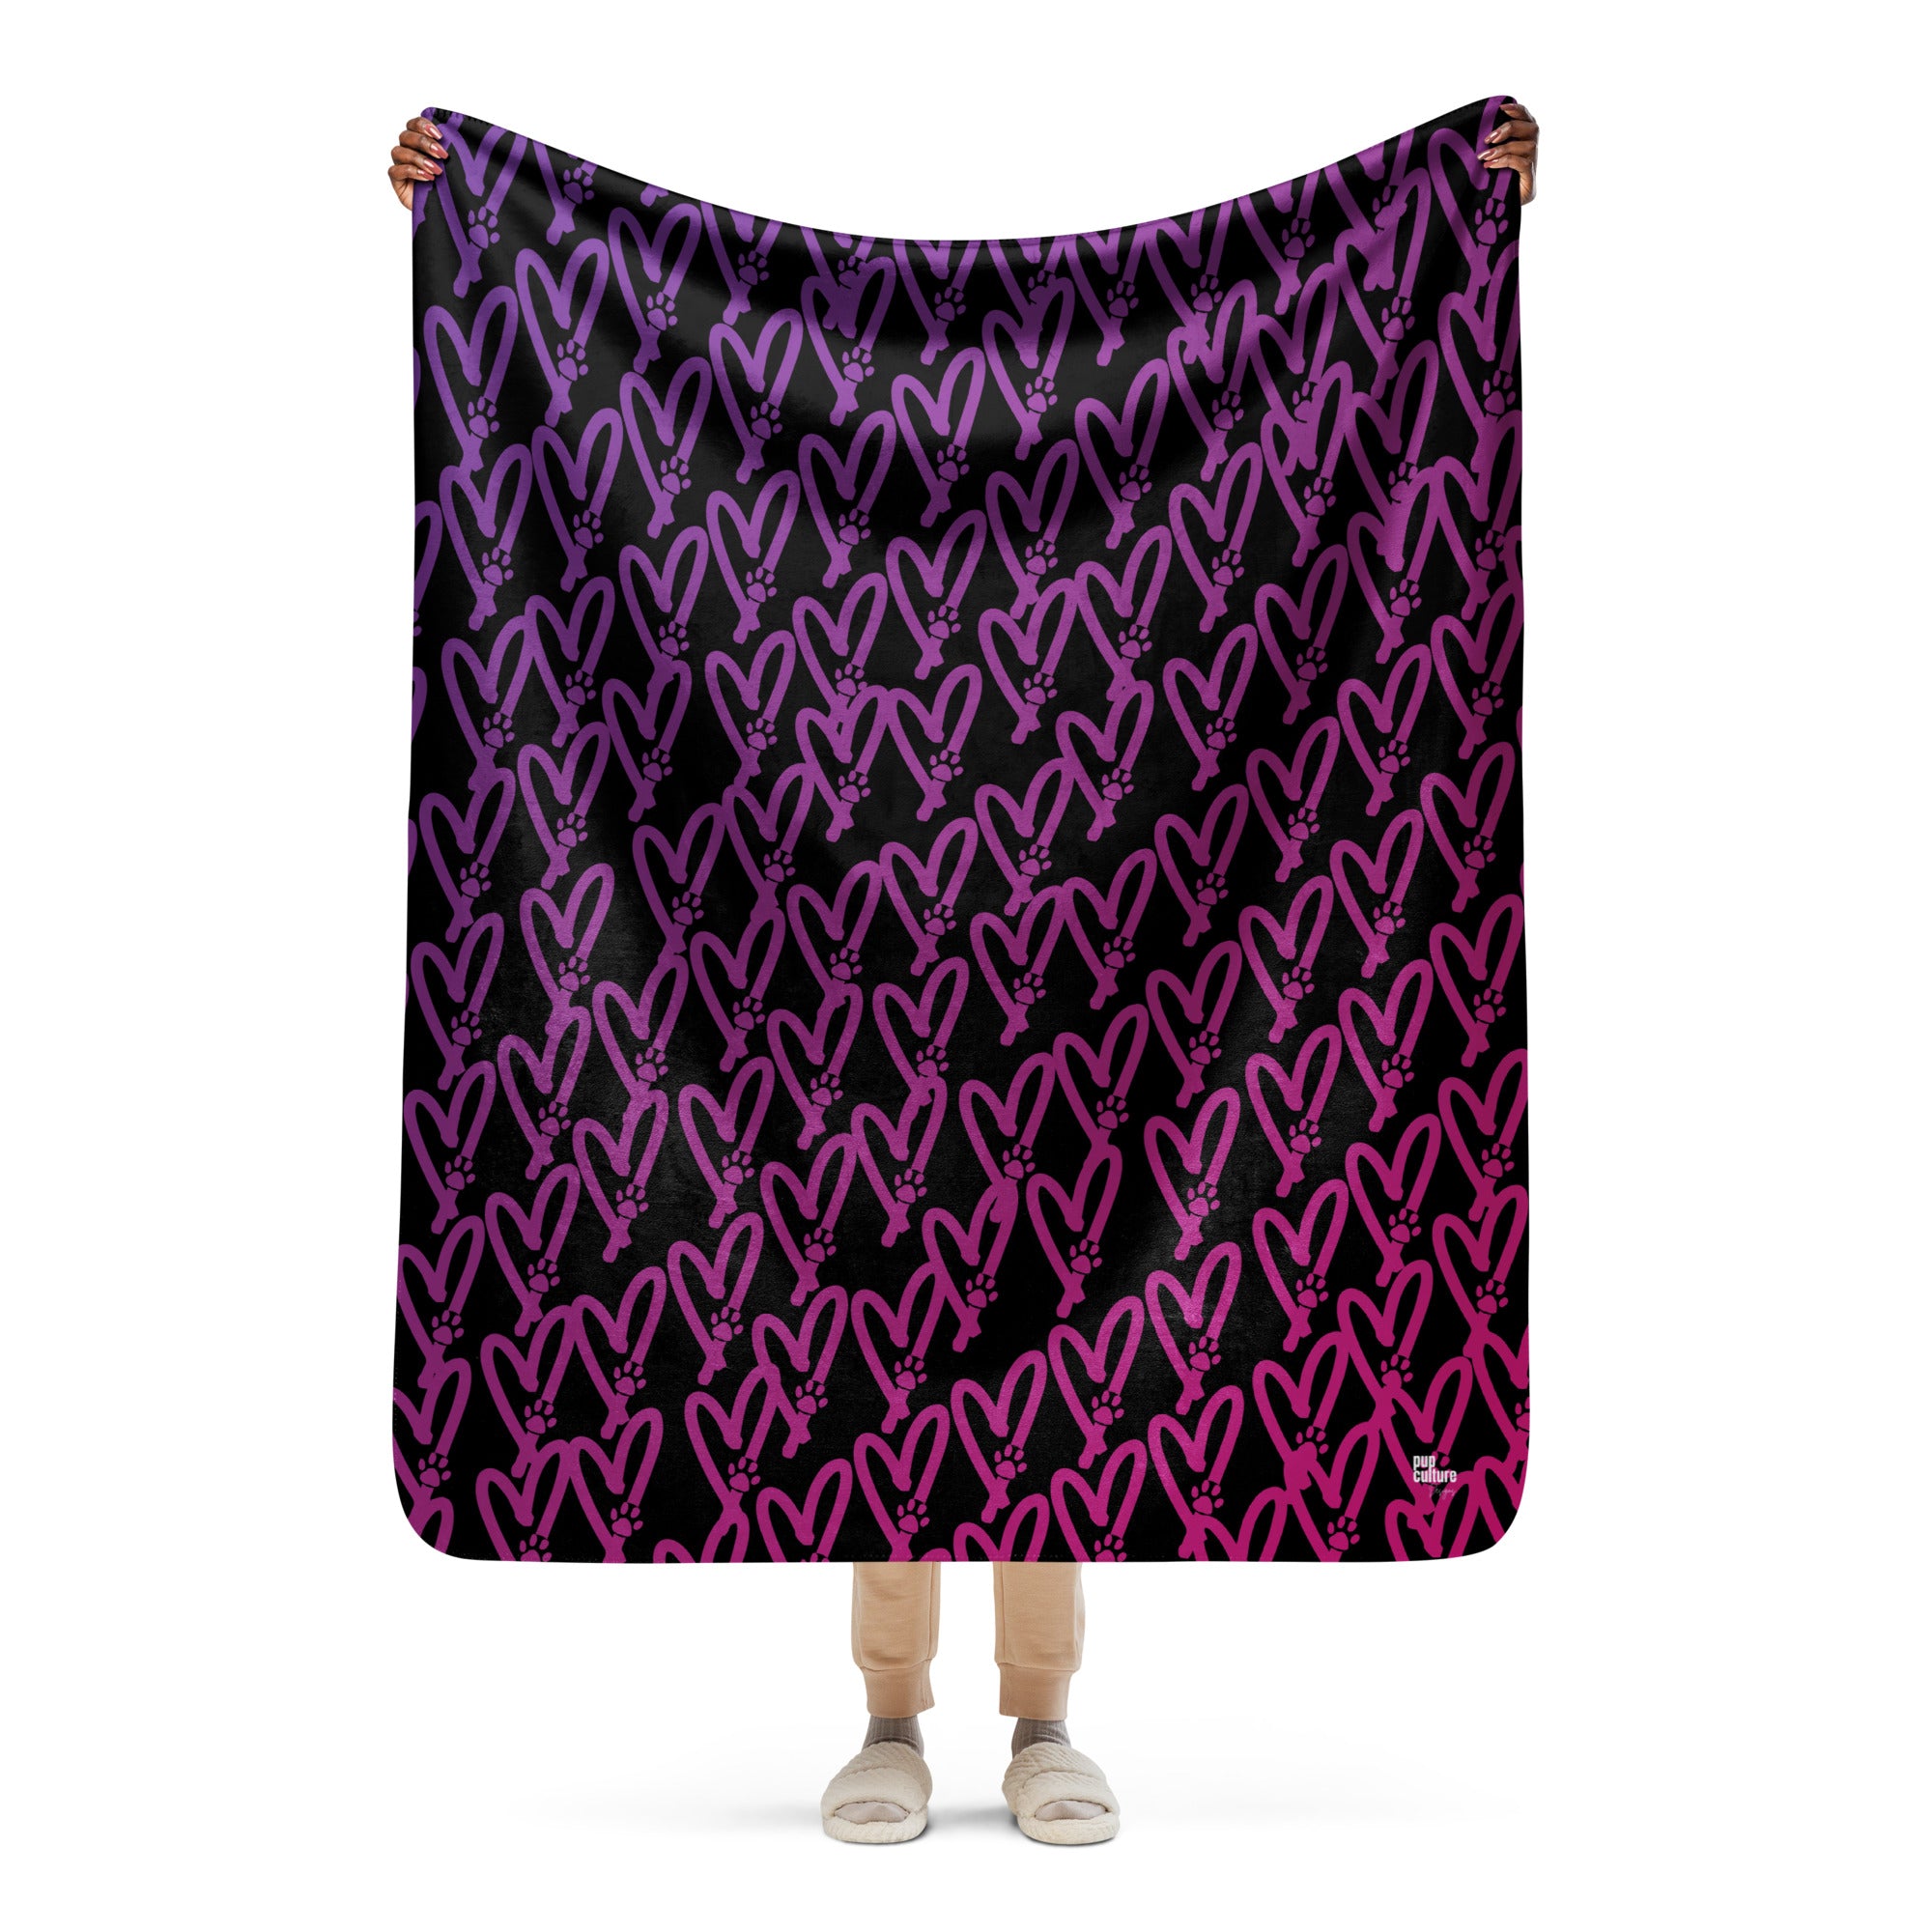 Dog Mom Heart and Paw Ombre Sherpa Blanket - dog-mom-heart-and-paw-ombre-sherpa-fleece-blanket